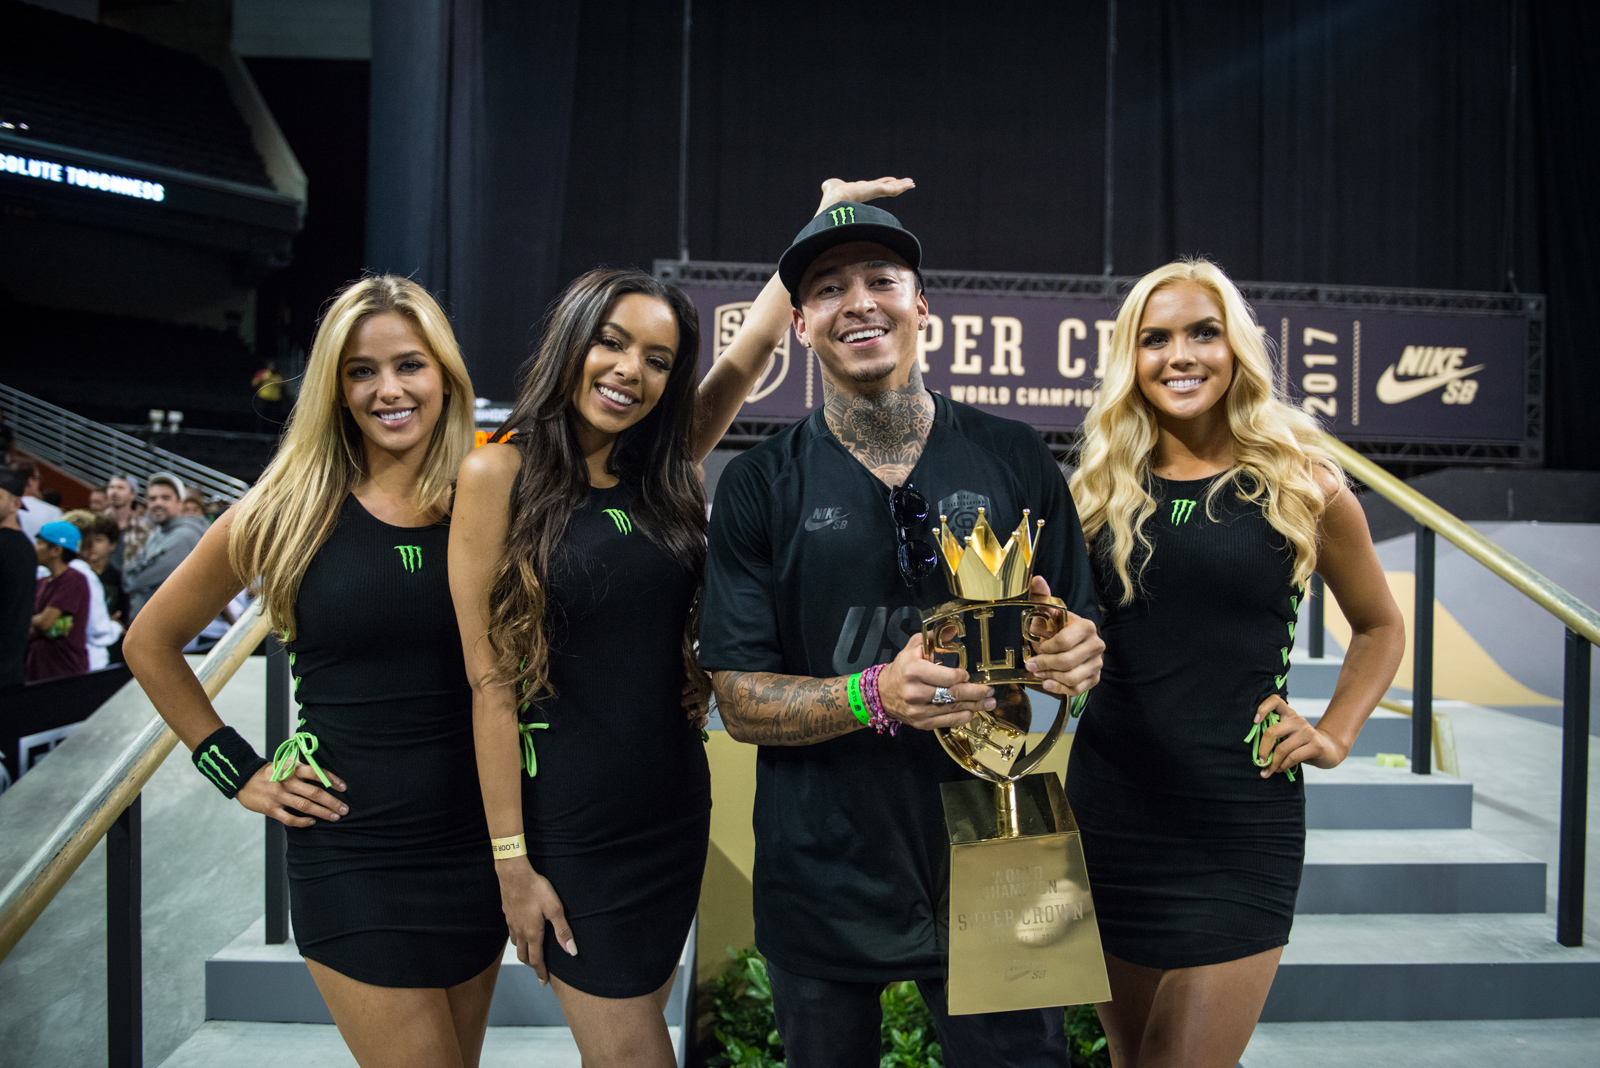 Monster Energy’s Nyjah Huston Wins the 2017 SLS Nike SB Super Crown World Championship in L.A.